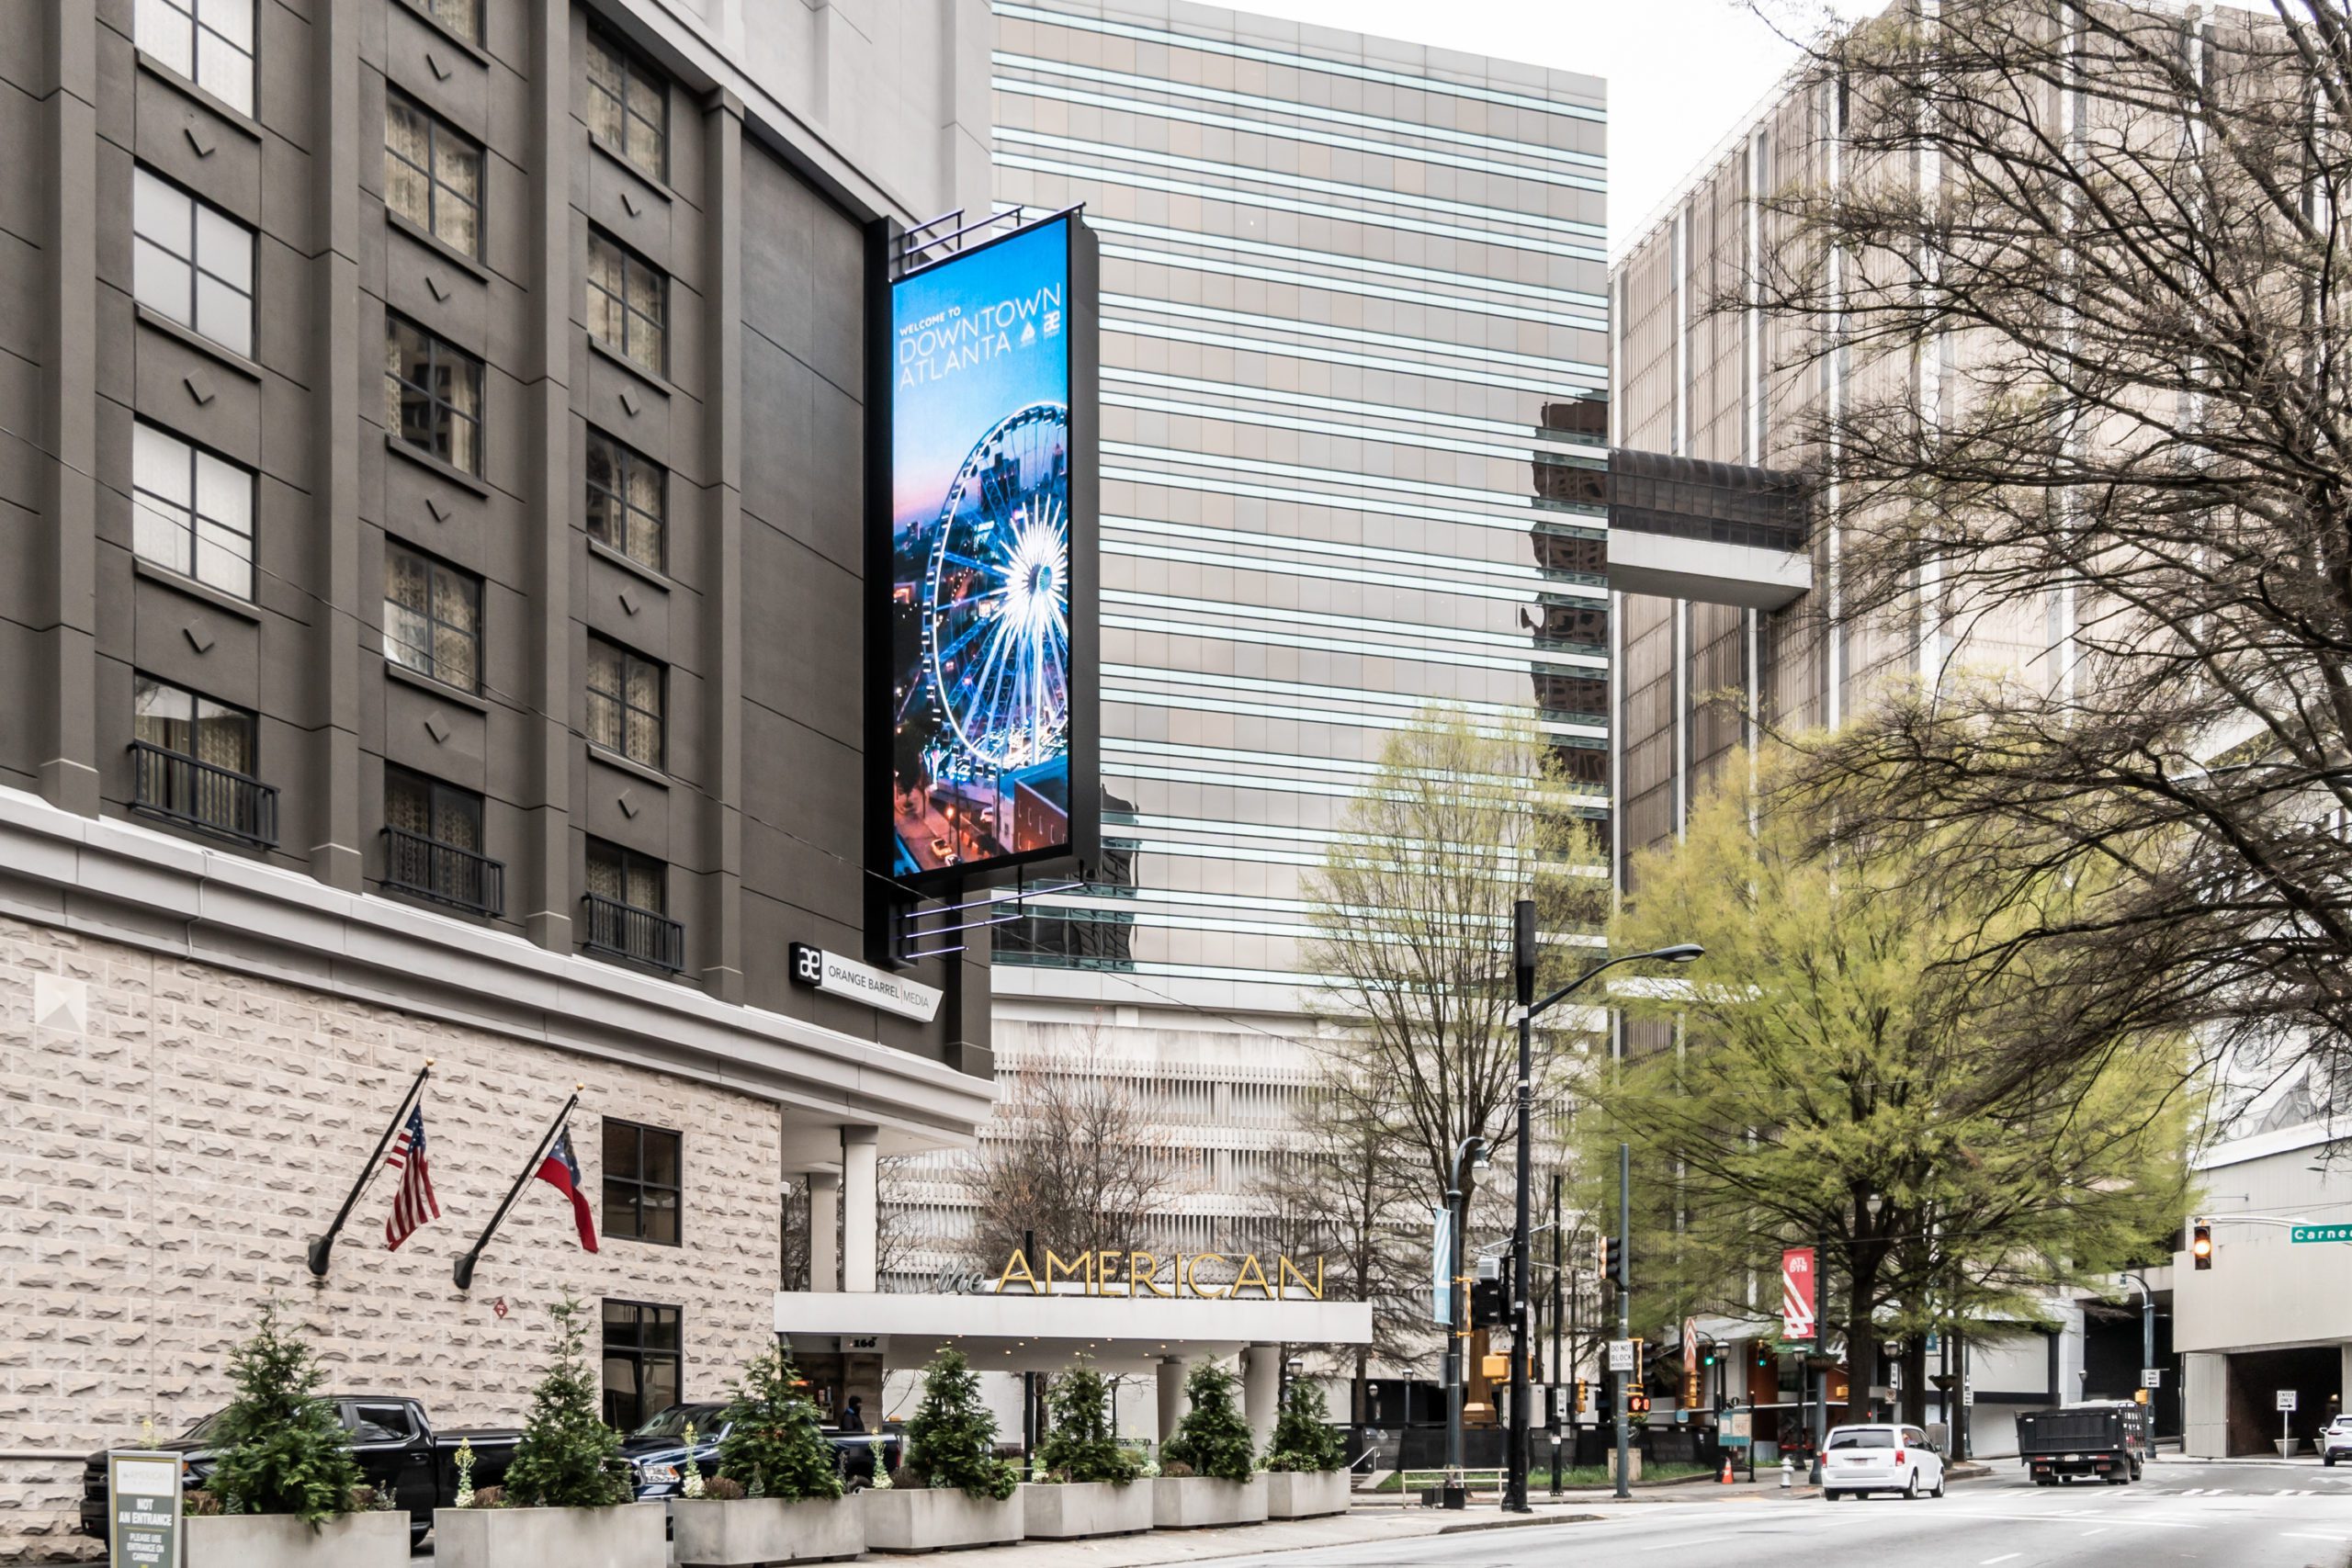 The American Hotel, LED Display